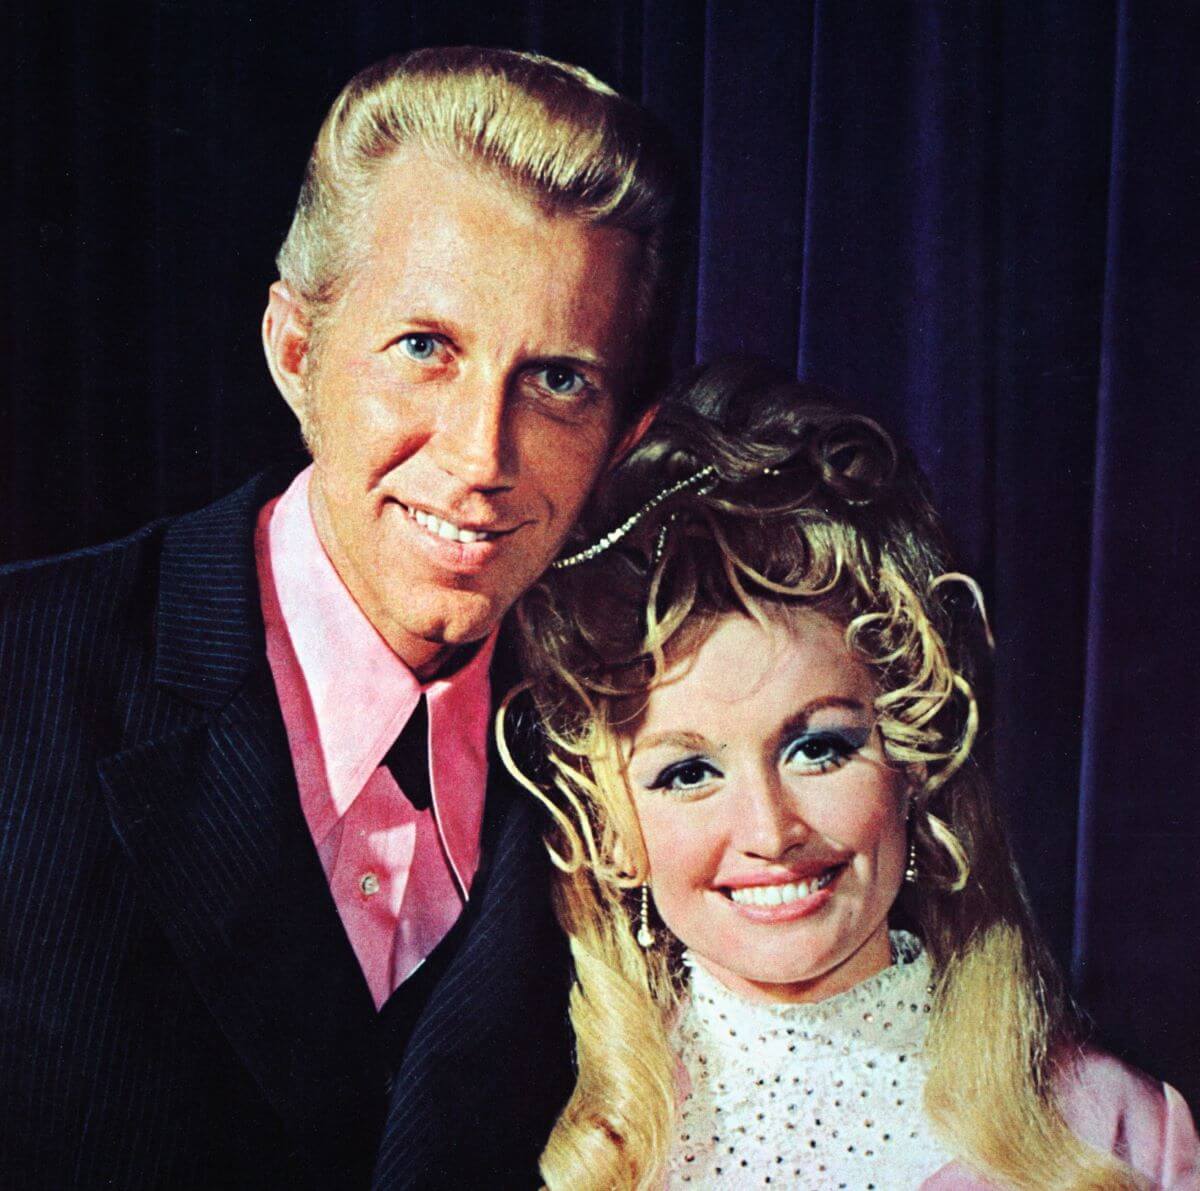 Porter Wagoner and Dolly Parton both wear pink and pose together.